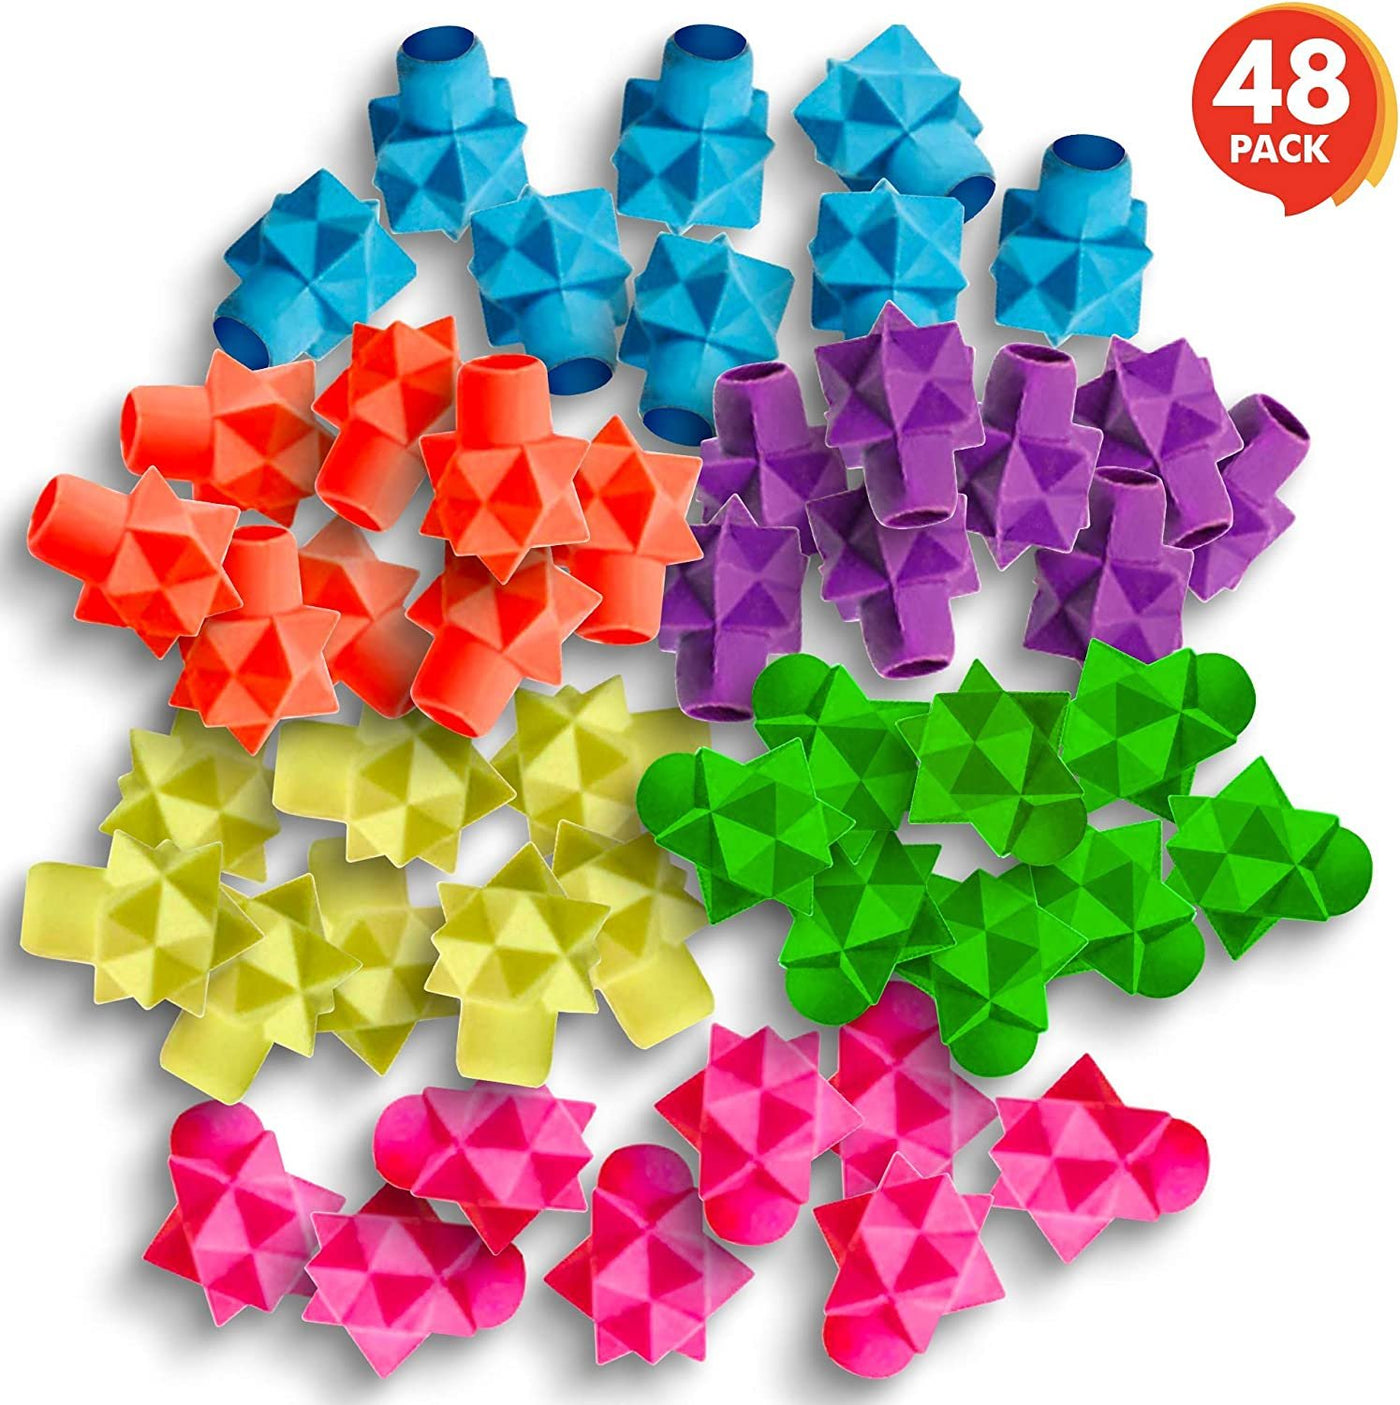 Star Pencil Top Erasers for Kids - 48 Pcs - Colorful Eraser Caps Toppe ·  Art Creativity